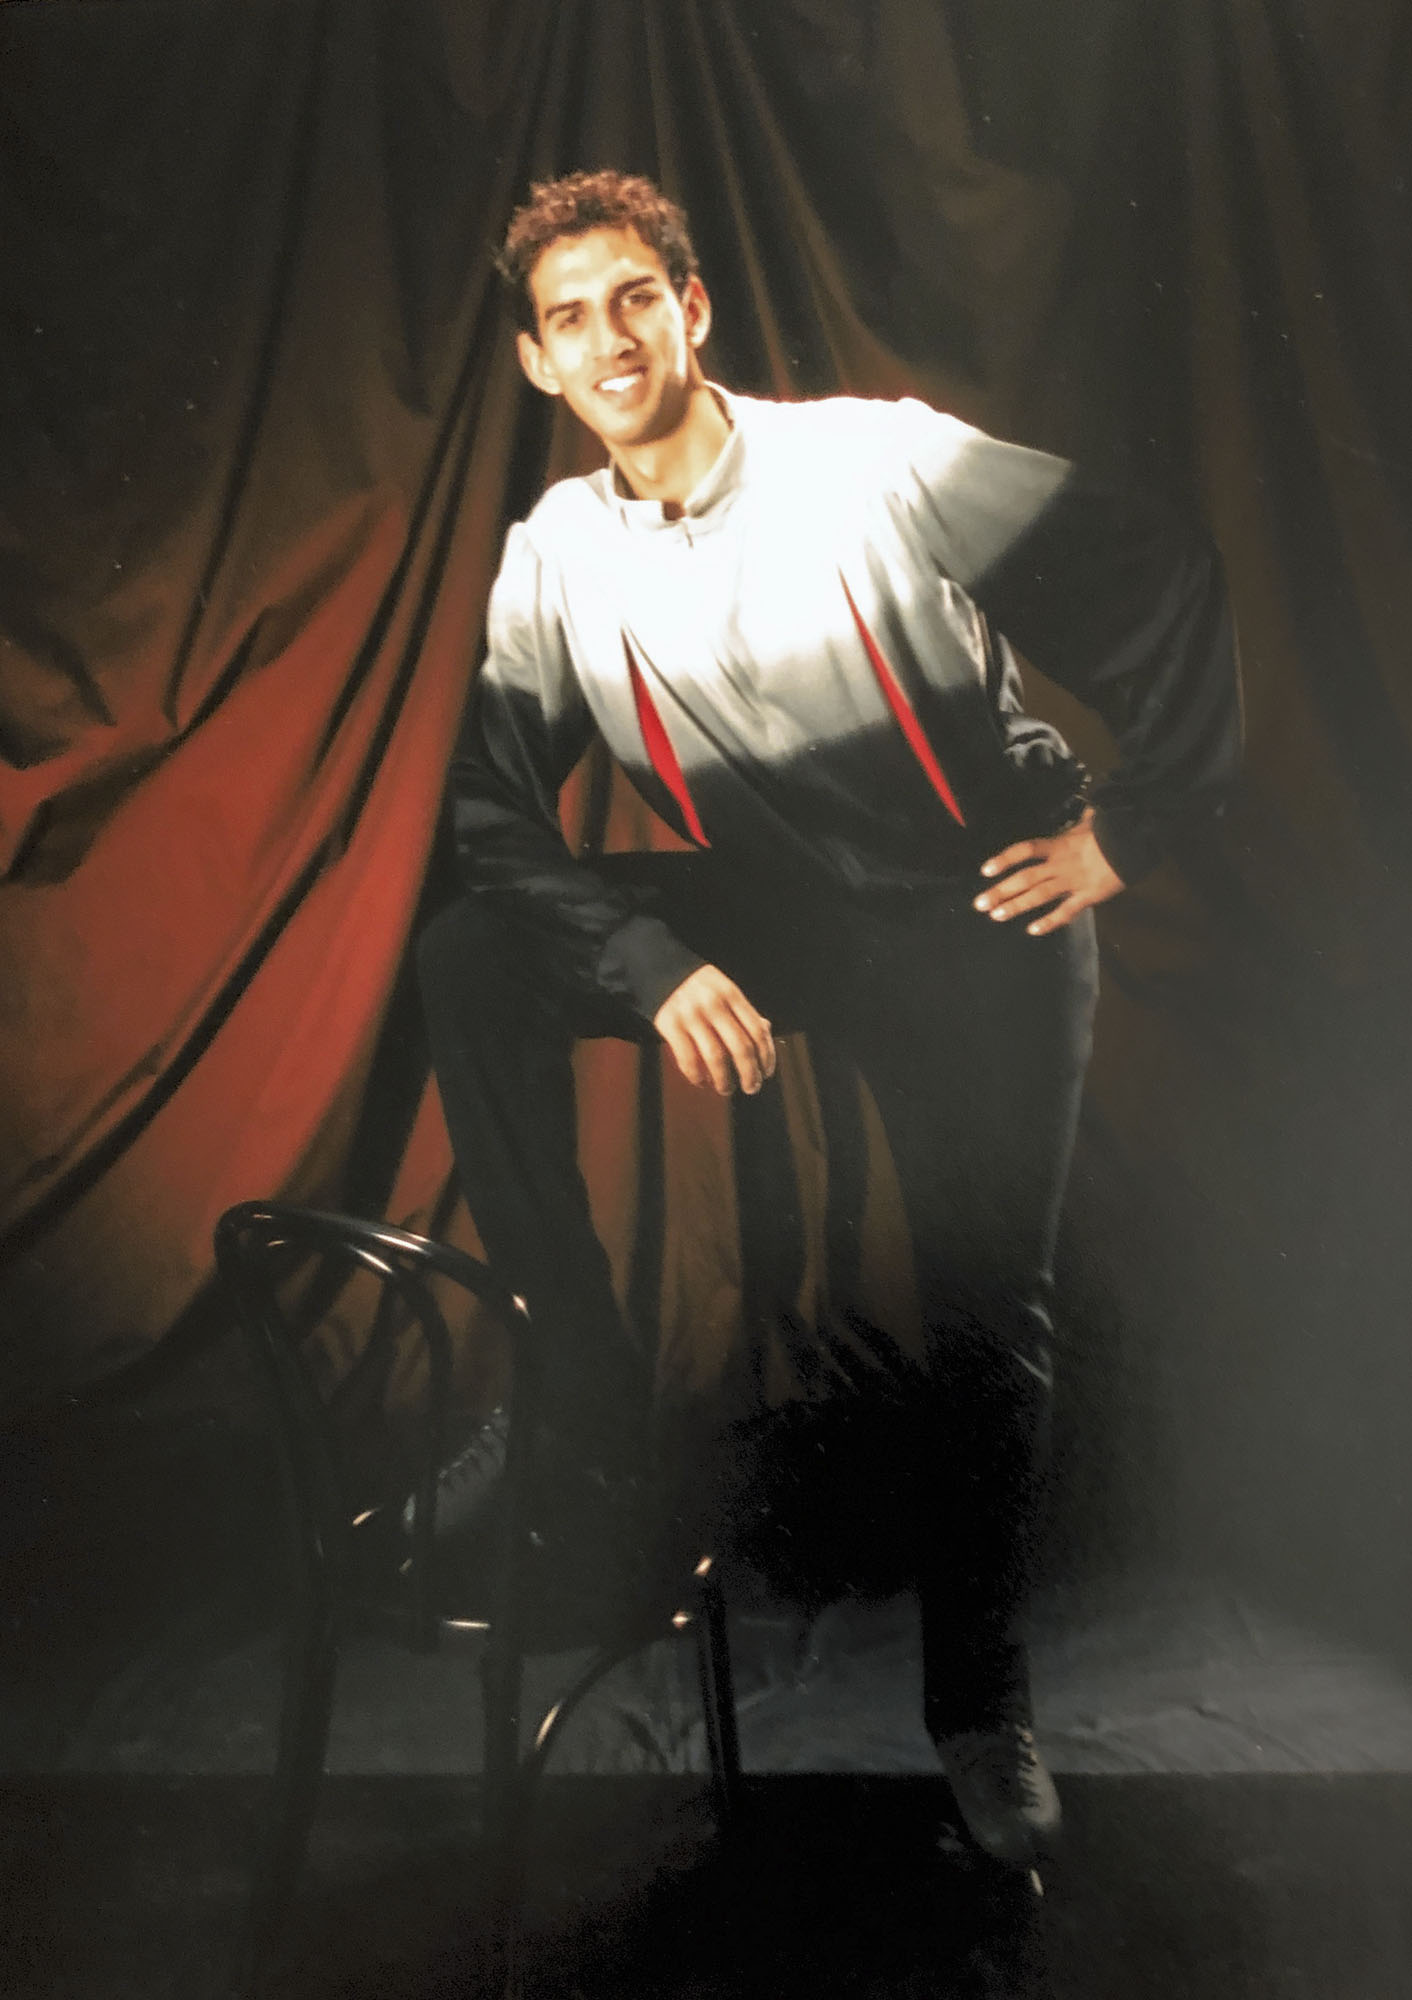 Christopher Ali standing with one leg on a chair posing for a picture